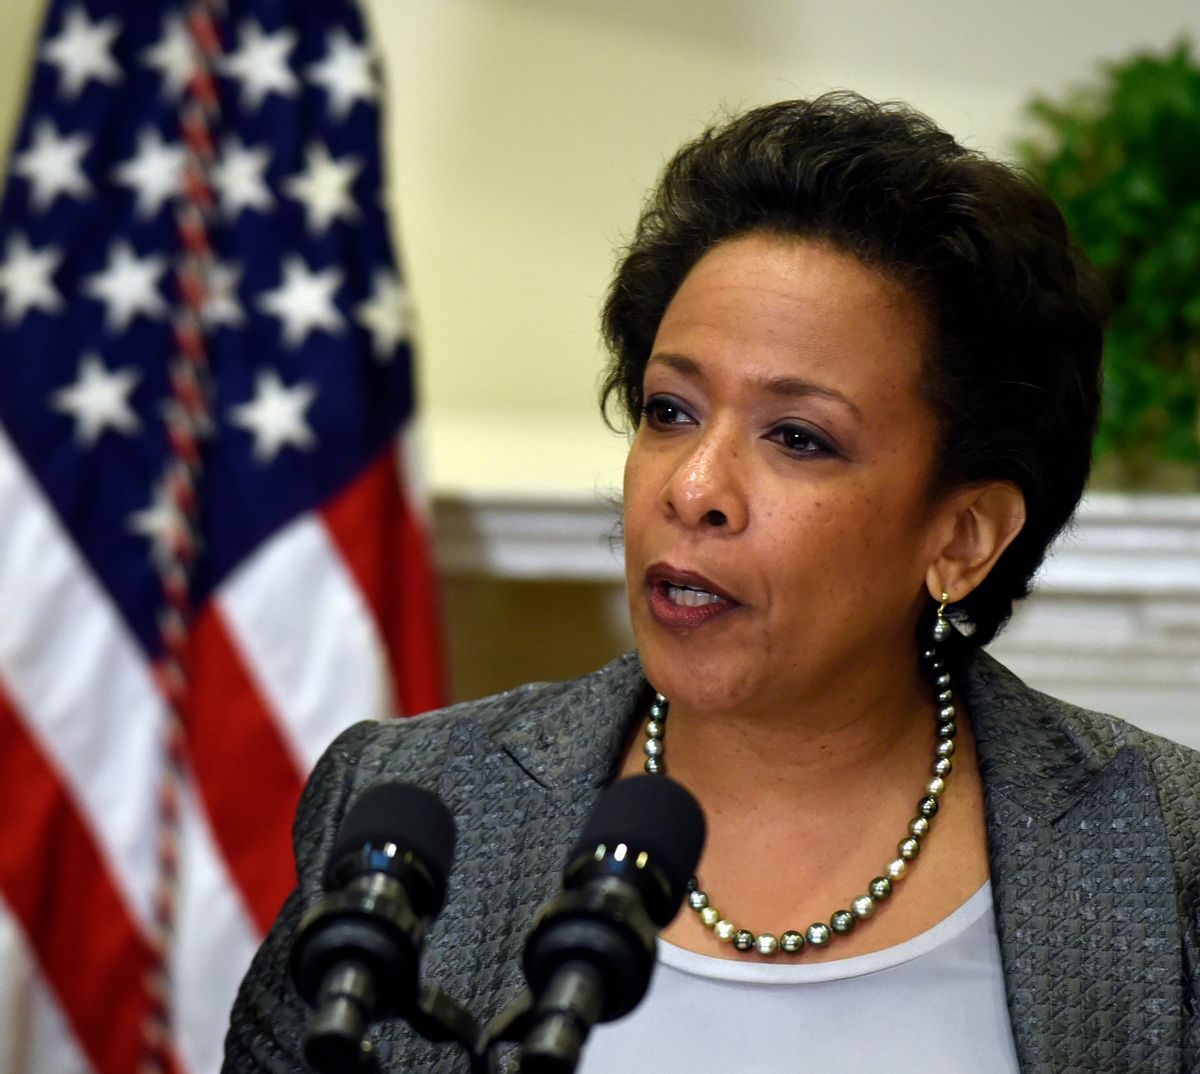 U.S. Attorney Loretta Lynch speaks in the Roosevelt Room of the White House in Washington, Saturday, Nov. 8, 2014, after President Barack Obama nominated her to be the next Attorney General succeeding Eric Holder. (AP Photo/Susan Walsh) (AP)